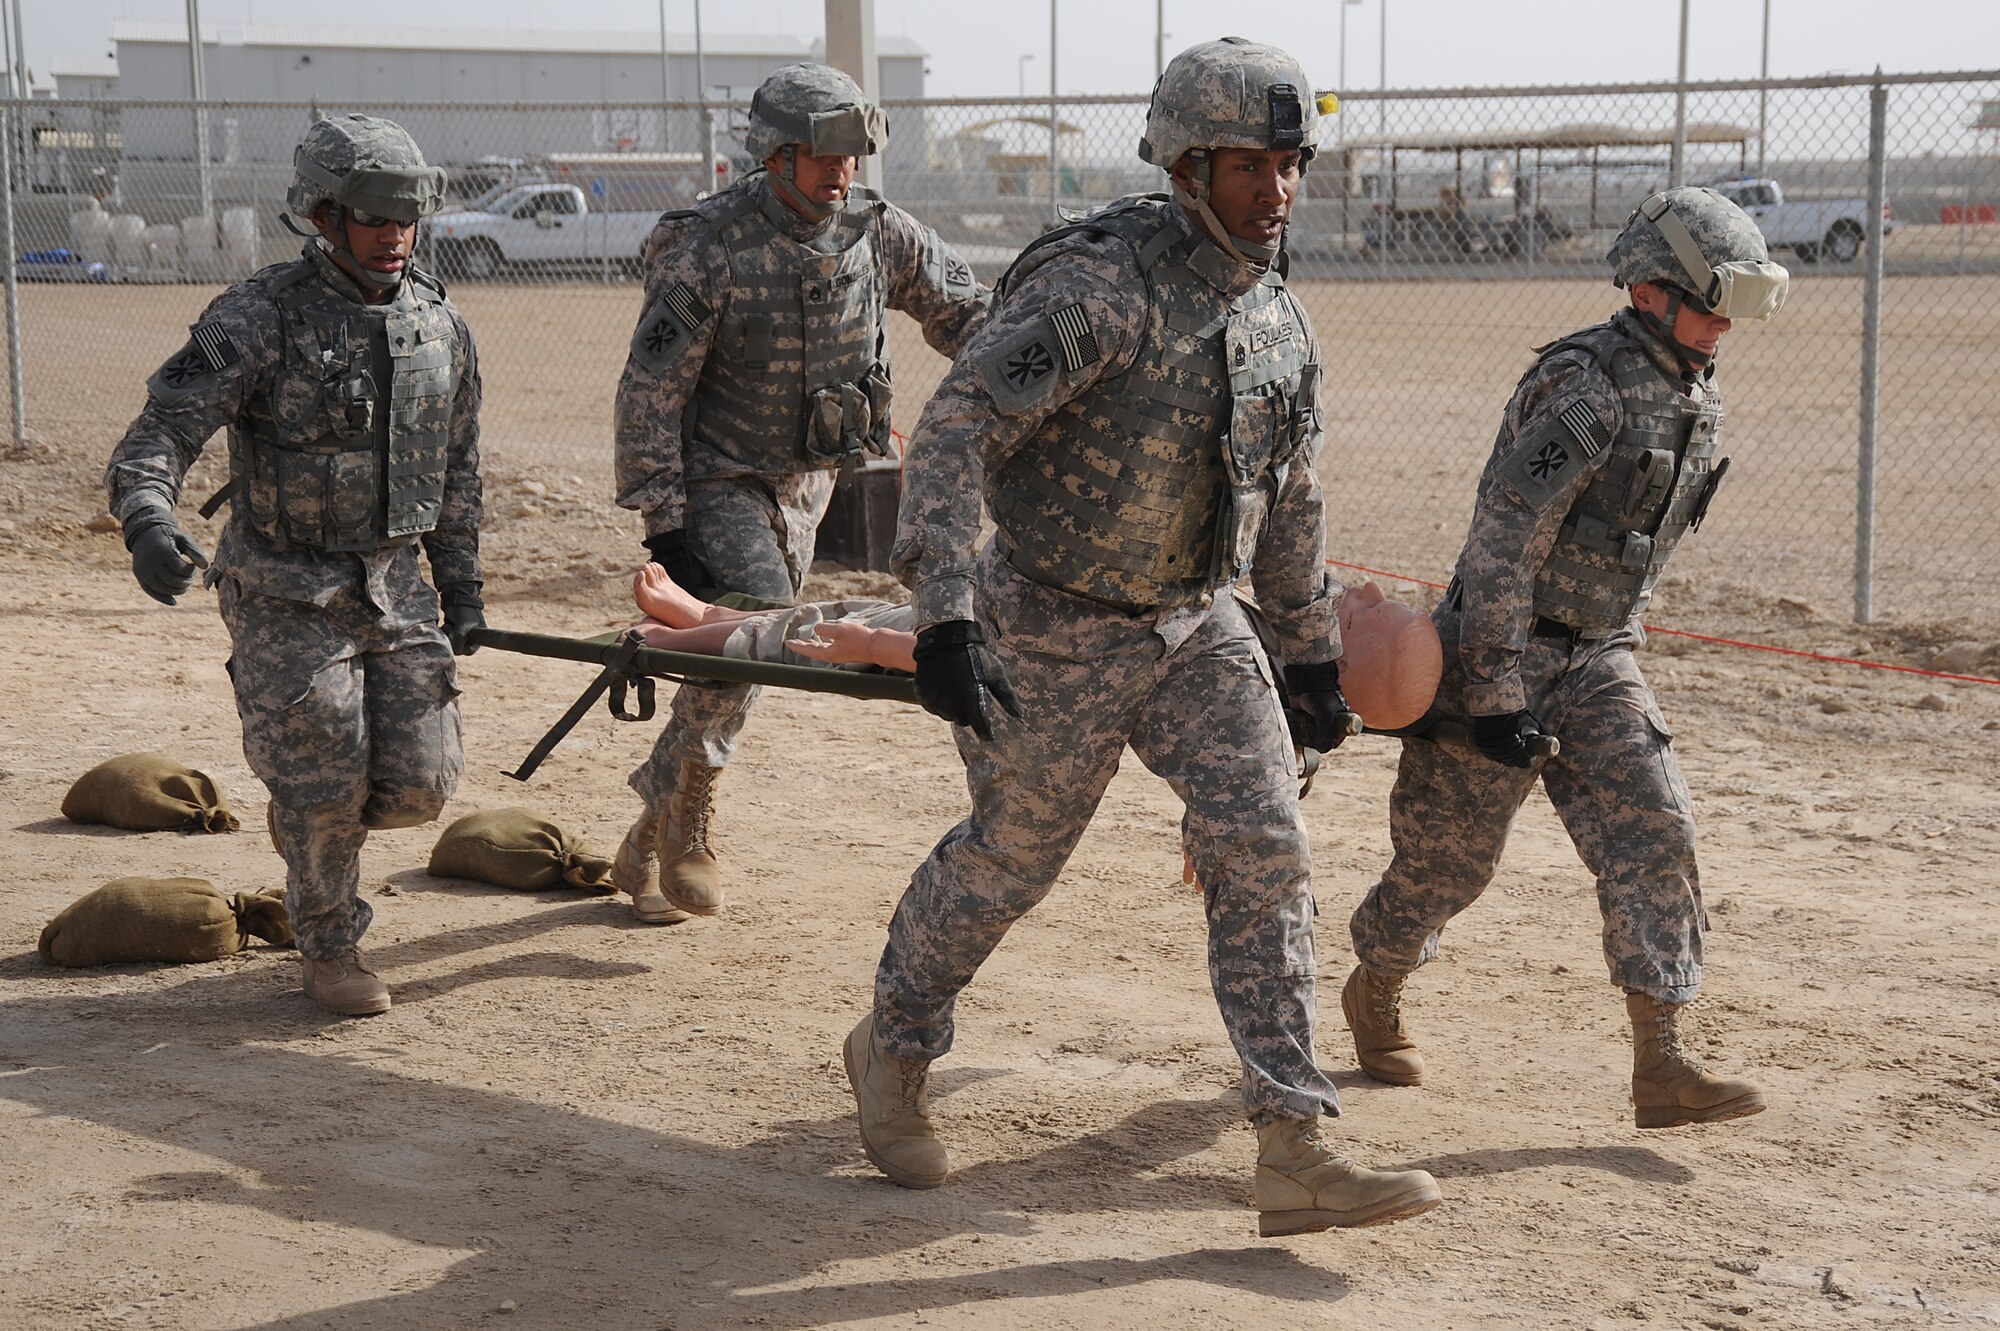 (Left to Right) Spc. Alexandre Whitnell, Staff Sgt. Patrick Gonzales, 1st Sgt. David Foulkes and Spc. Jennifer Stecher, 5-52 Air Defense Artillery Battalion, carry a "body" on a stretcher during a Defender Challenge course, April 25 at an undisclosed location in Southwest Asia. The team finished in second place, just one second behind the winning team. All four Soldiers are deployed with 5-52 Air Defense Artillery Battalion out of Fort Bliss, Texas. Specialist Whitnell hails from Chicago, Ill. Sergeant Gonzales is from El Paso, Texas. Sergeant Foulkes hails from Bronx, N.Y. Specialist Stecher is from Fredricksburg, Va. (U.S. Air Force photo by Senior Airman Brian J. Ellis) (Released)